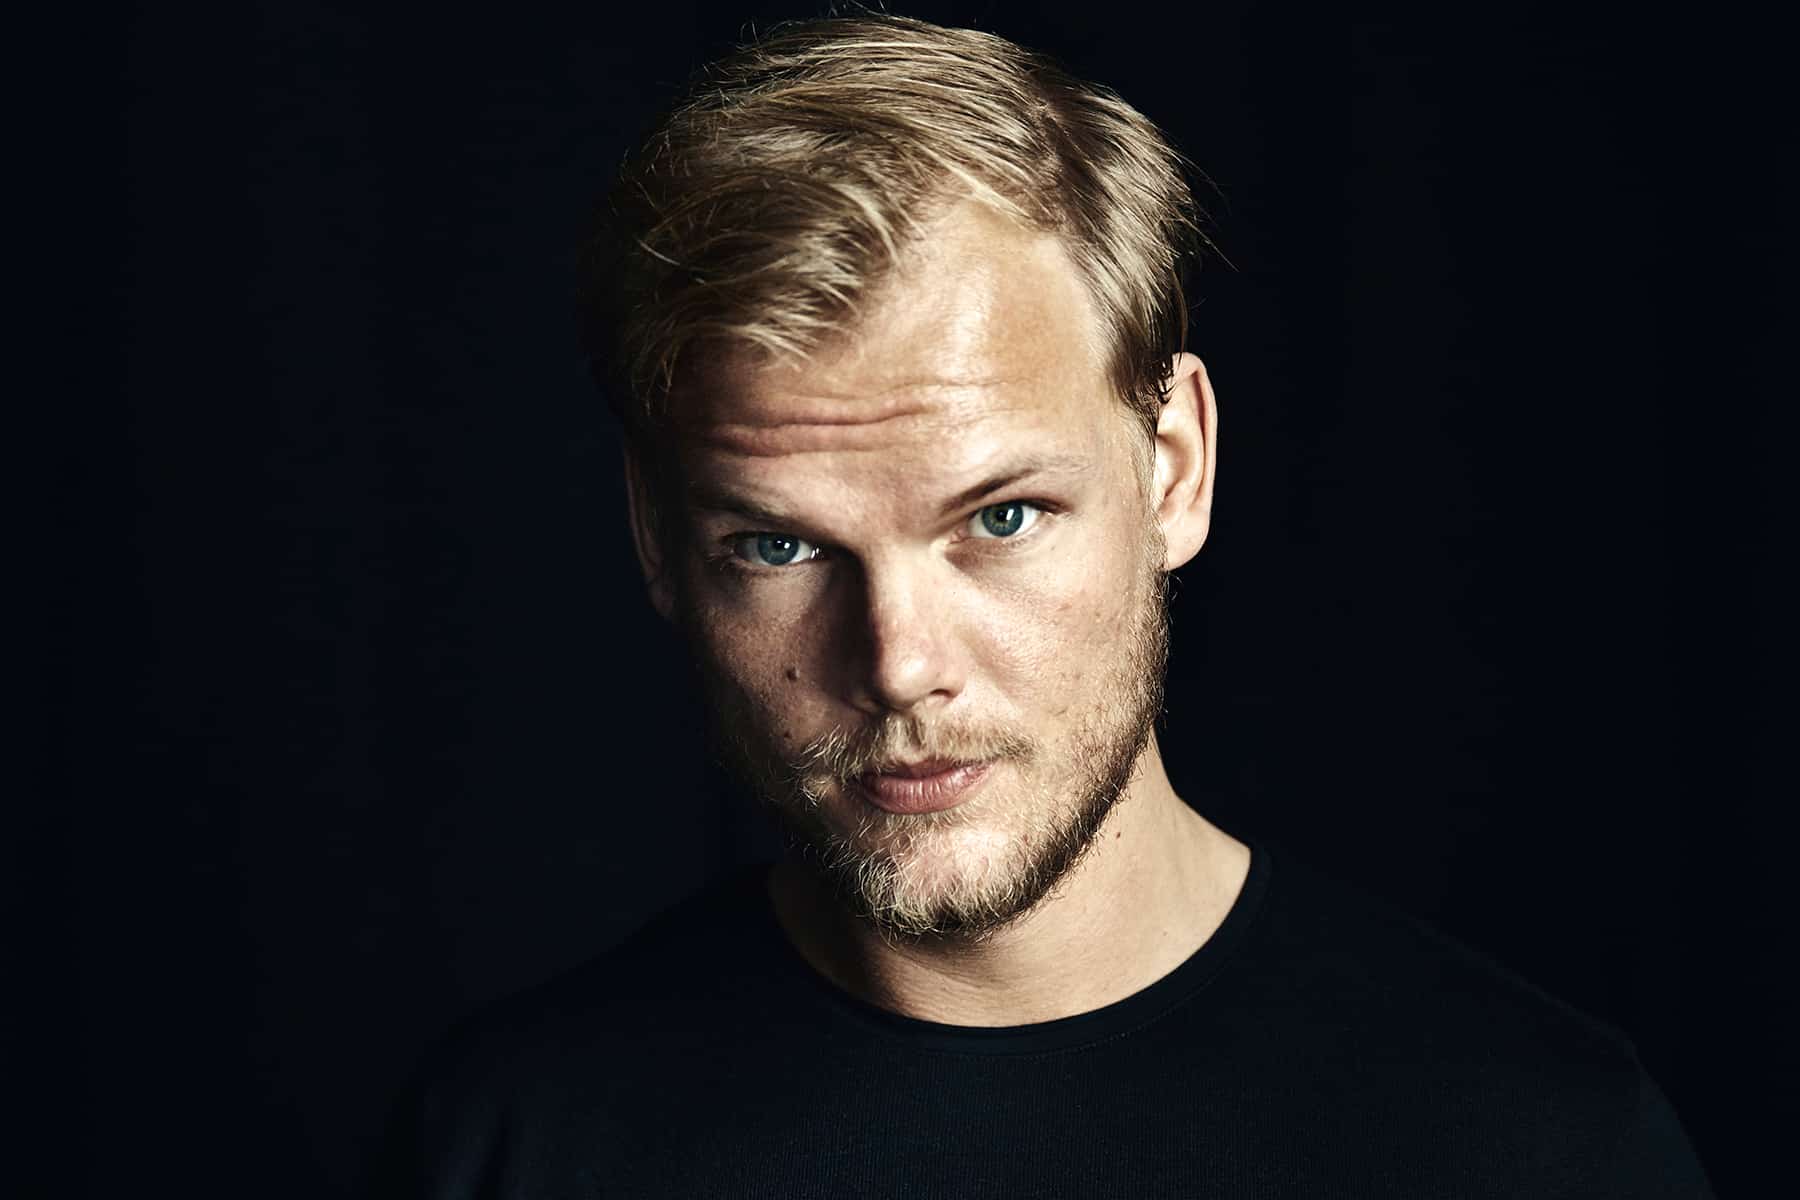 Avicii: The Life and Music of Tim Bergling photobook now available in English